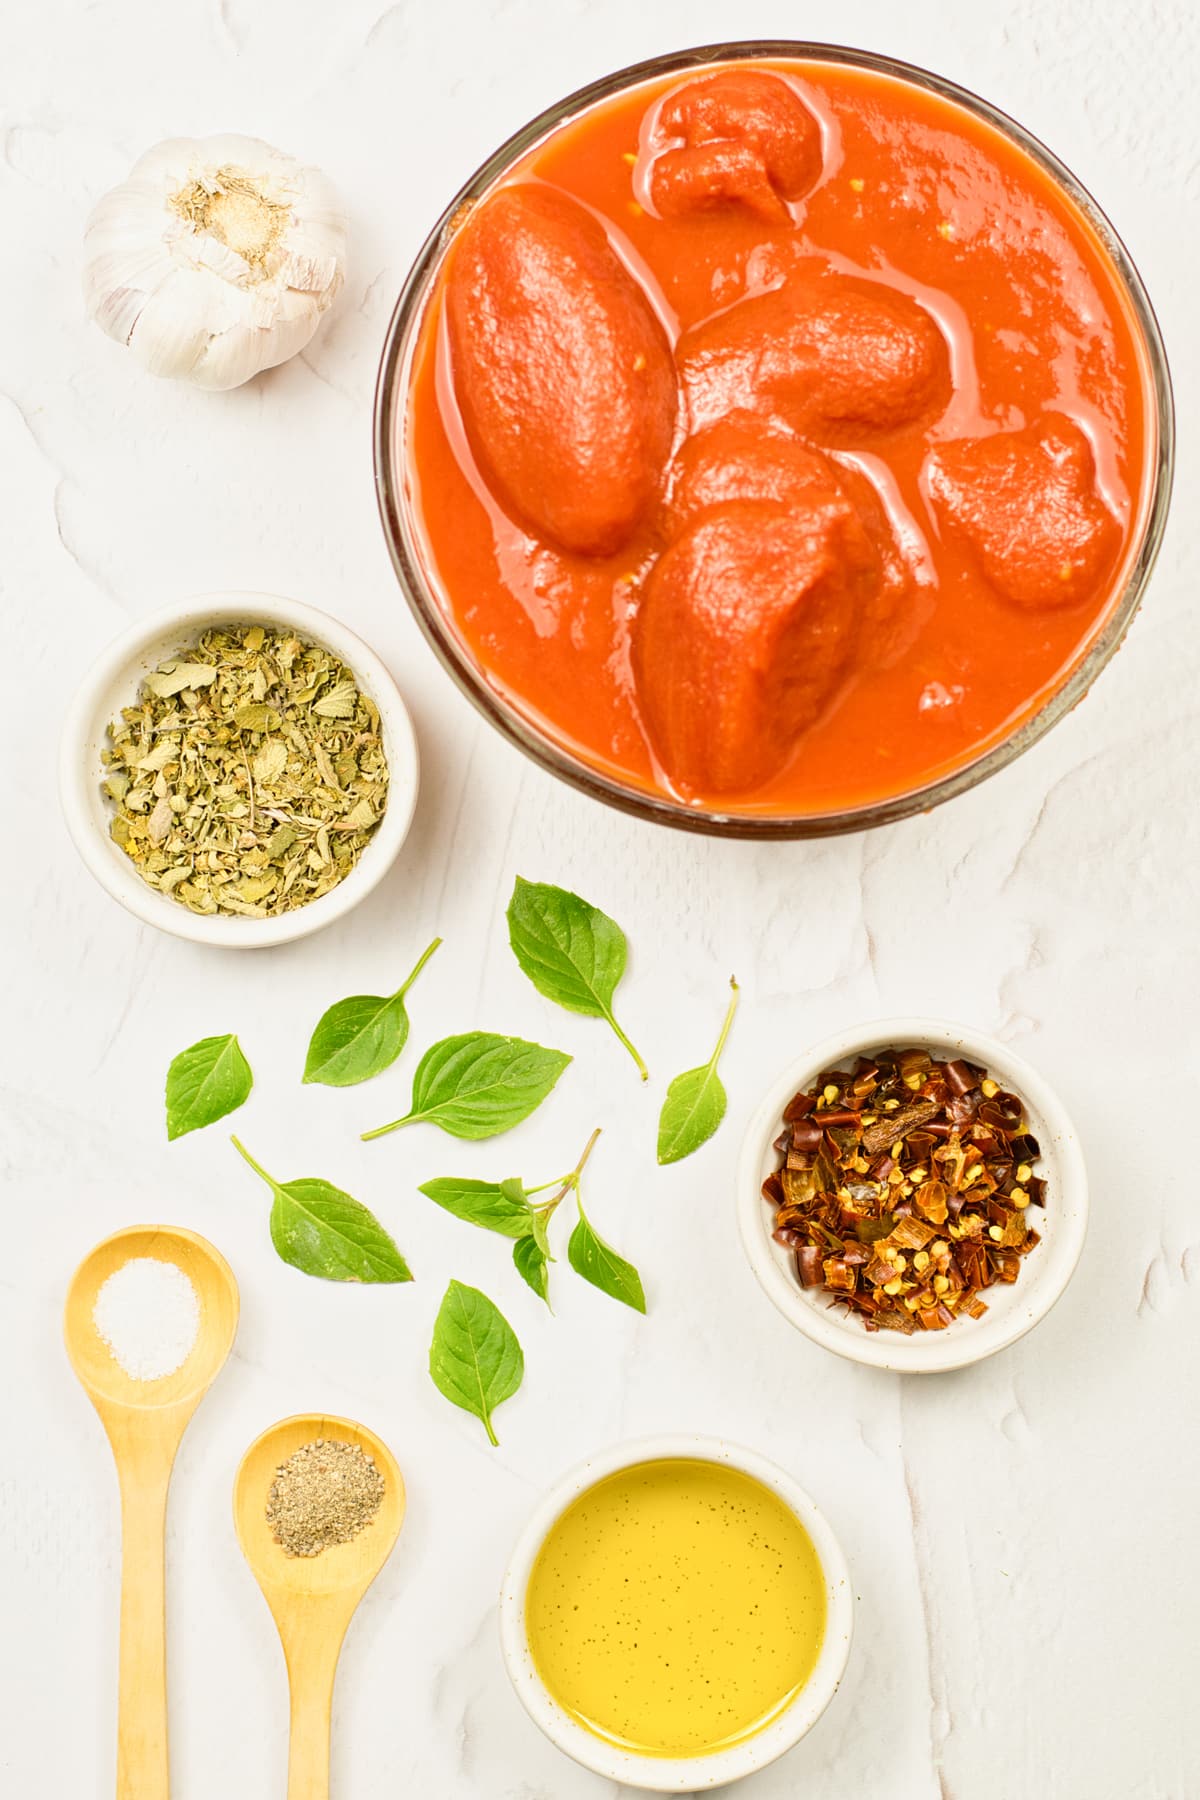 Ingredients for Italian Marinara Sauce Recipe are the following: garlic, tomatoes, olive oil, oregano, basil leaves, salt. red pepper flakes, black pepper